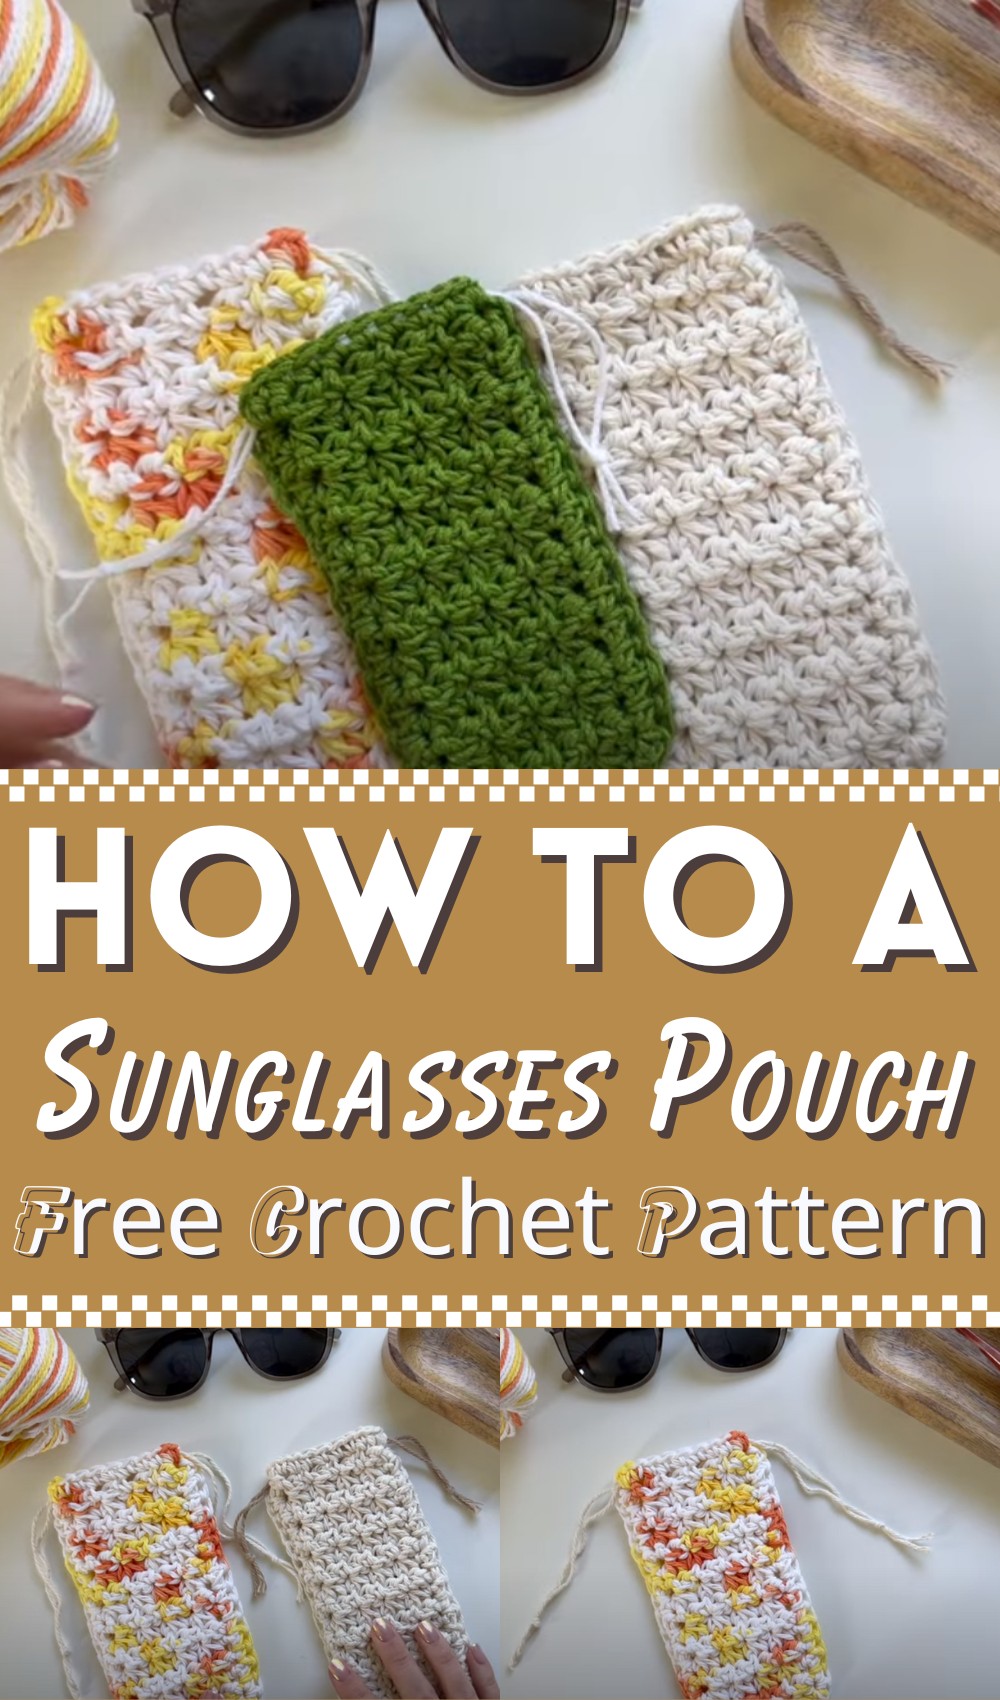 How To Crochet A Sunglasses Pouch